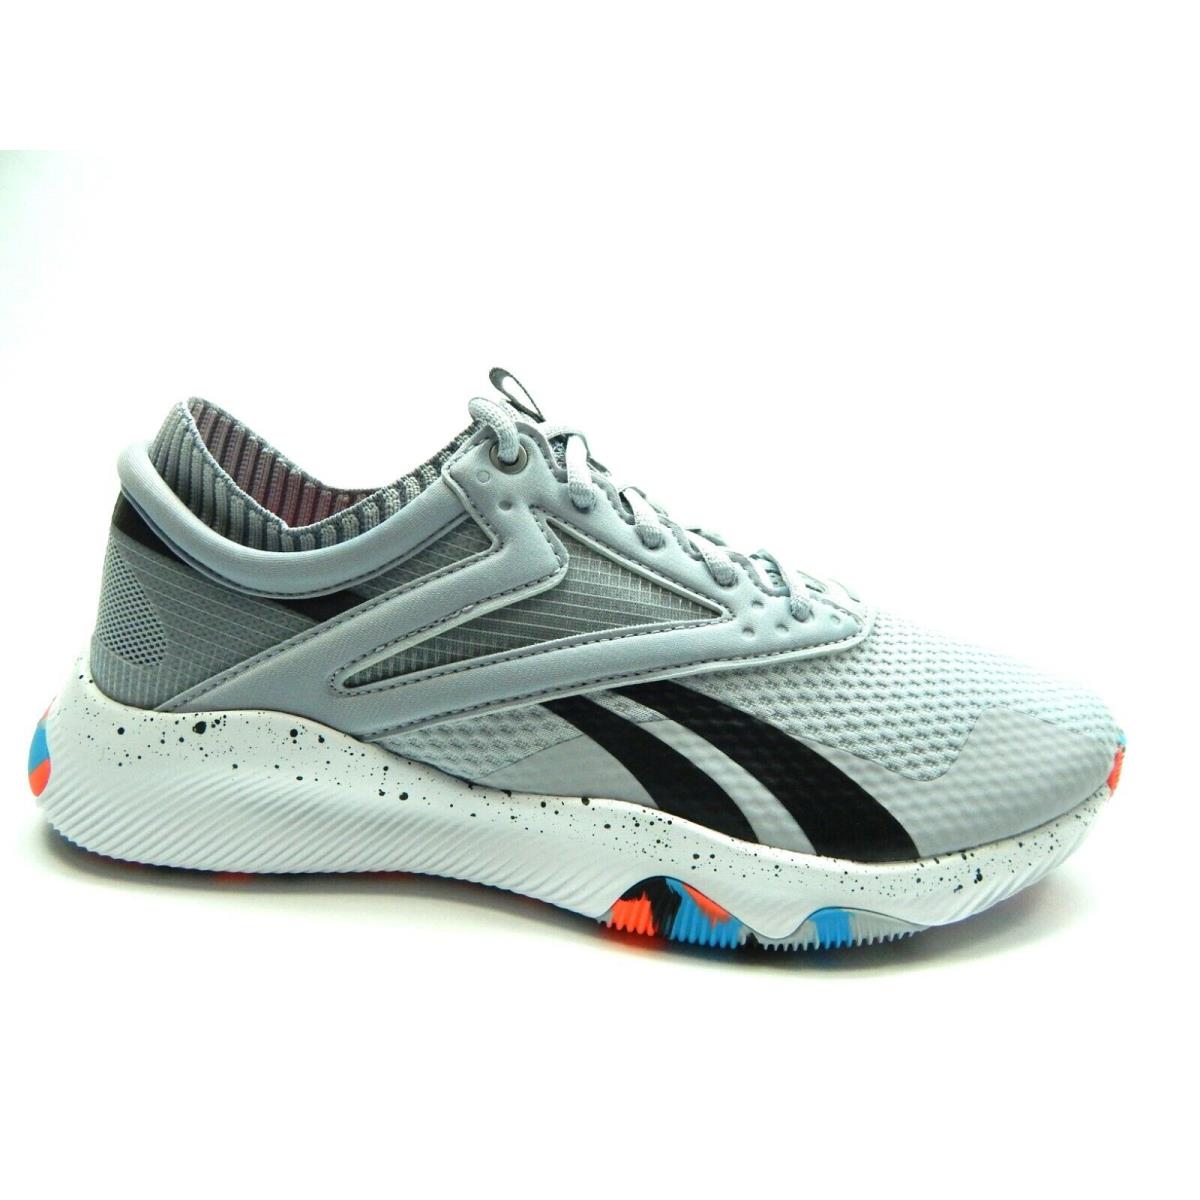 Reebok Hiit TR Training G55473 Cold Grey Women Shoes Size 10